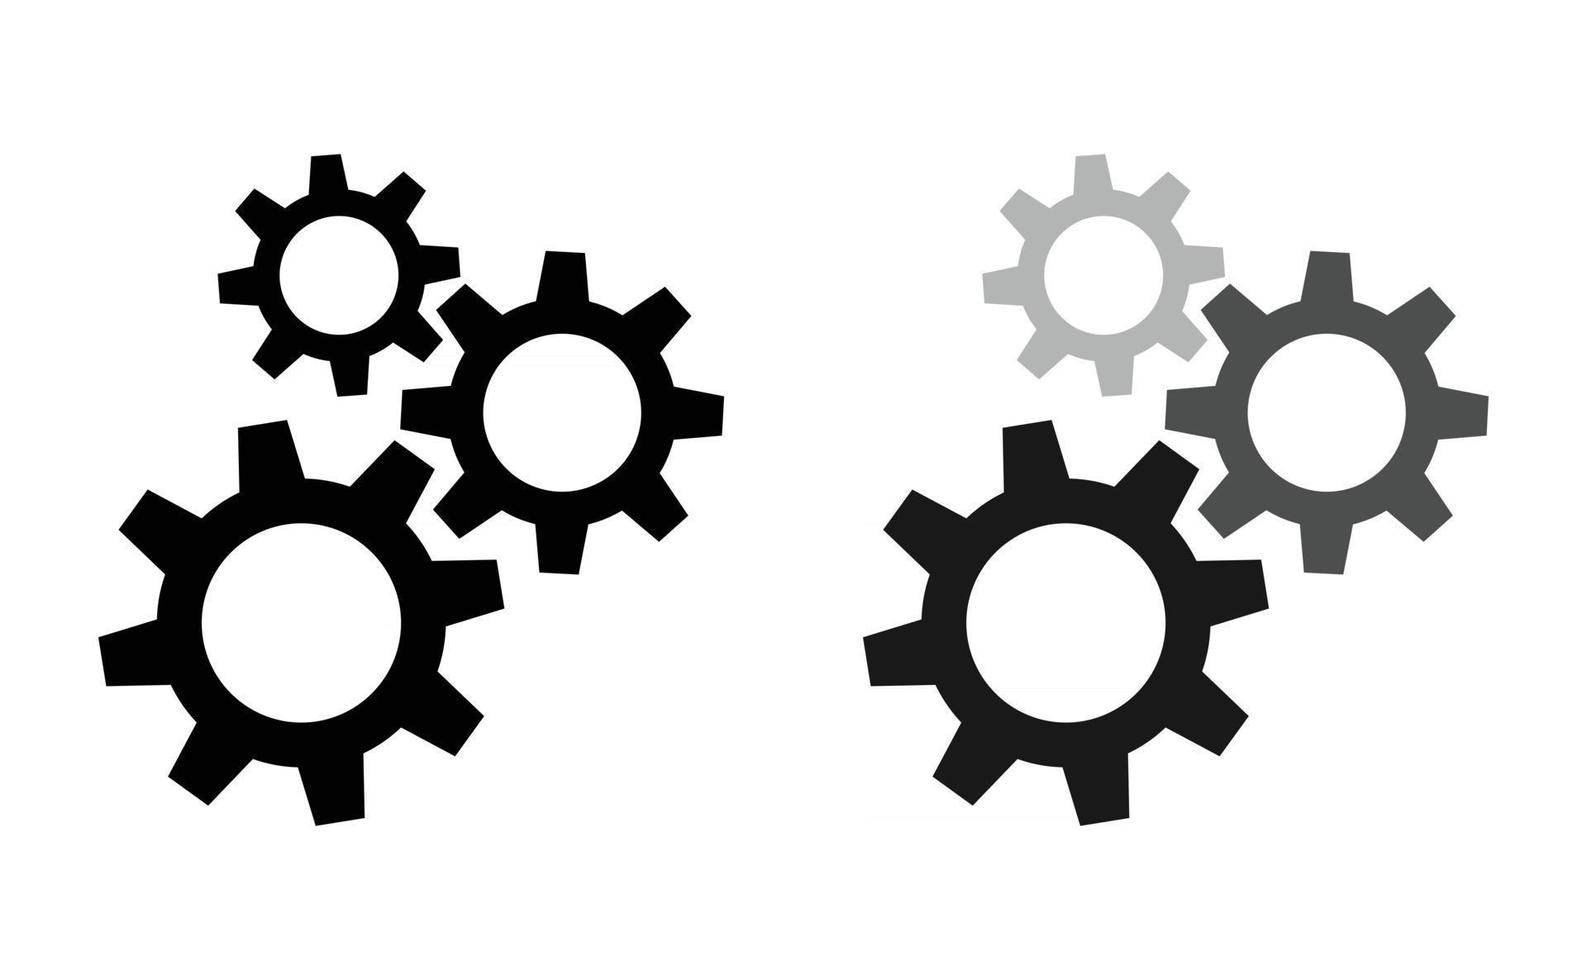 Setting gears icon. Cogwheel group. Gear design collection on white background free vector